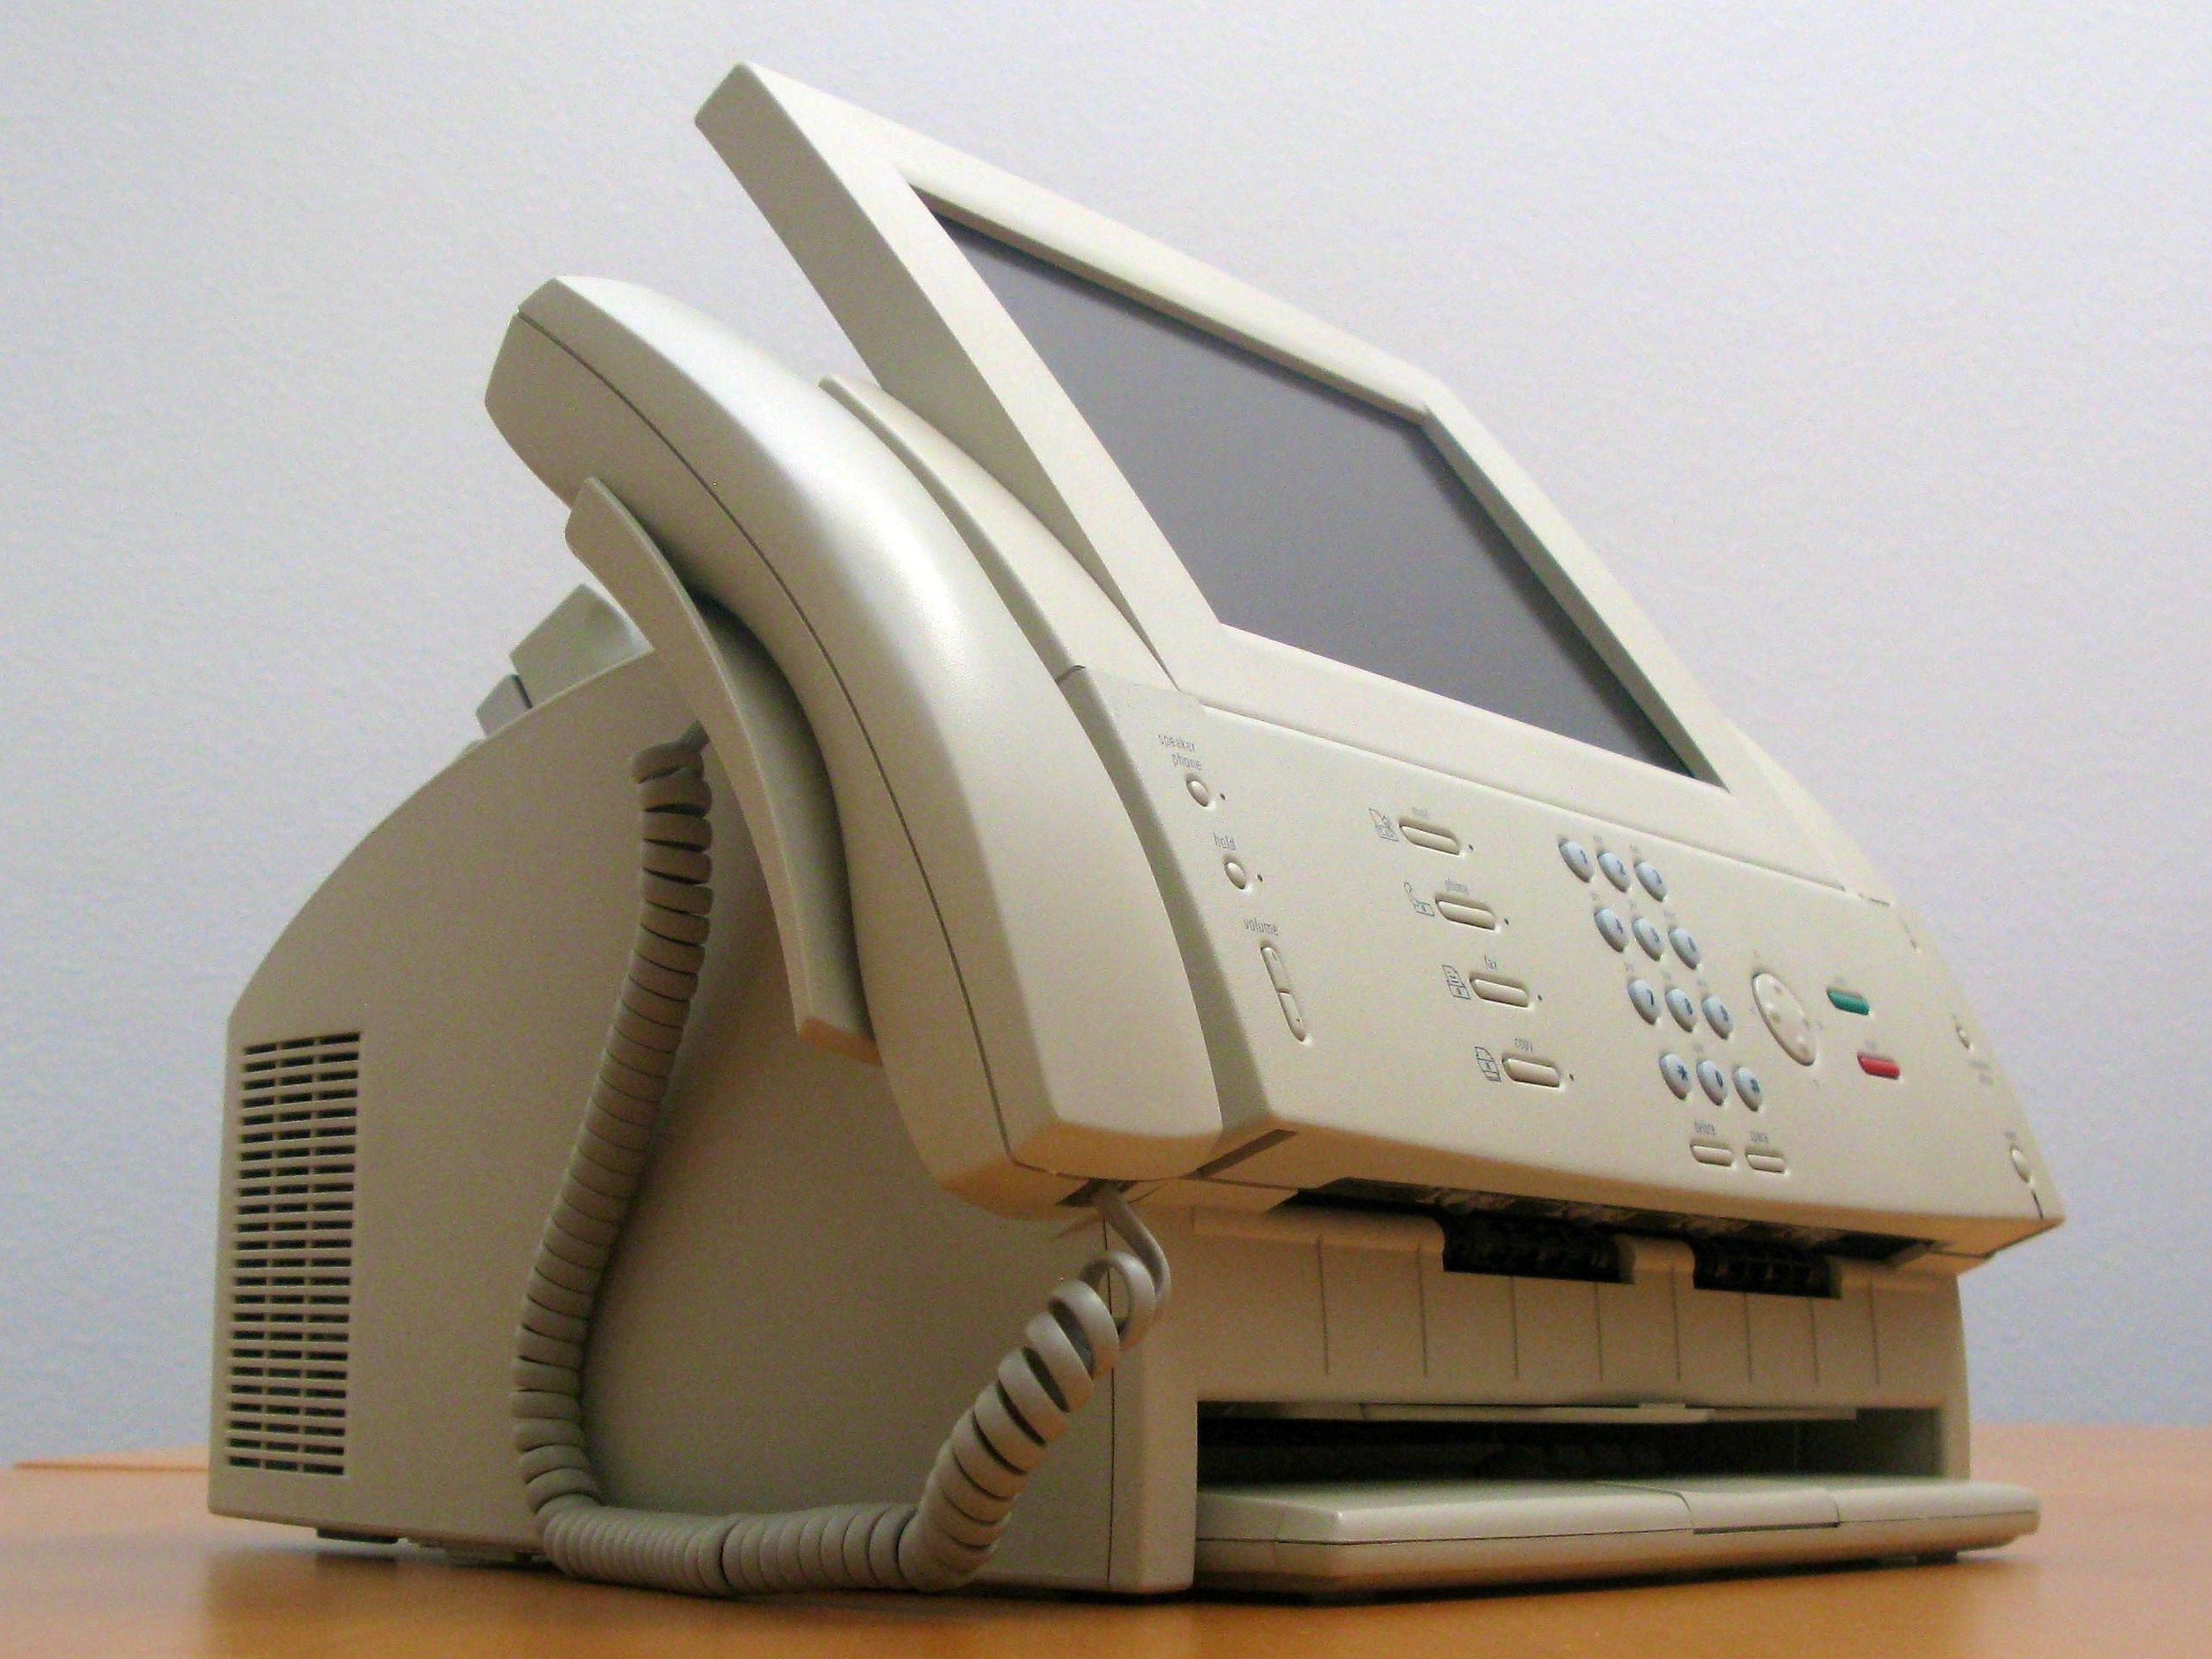 An image of the Apple Paladin computer, fax machine, and telephone